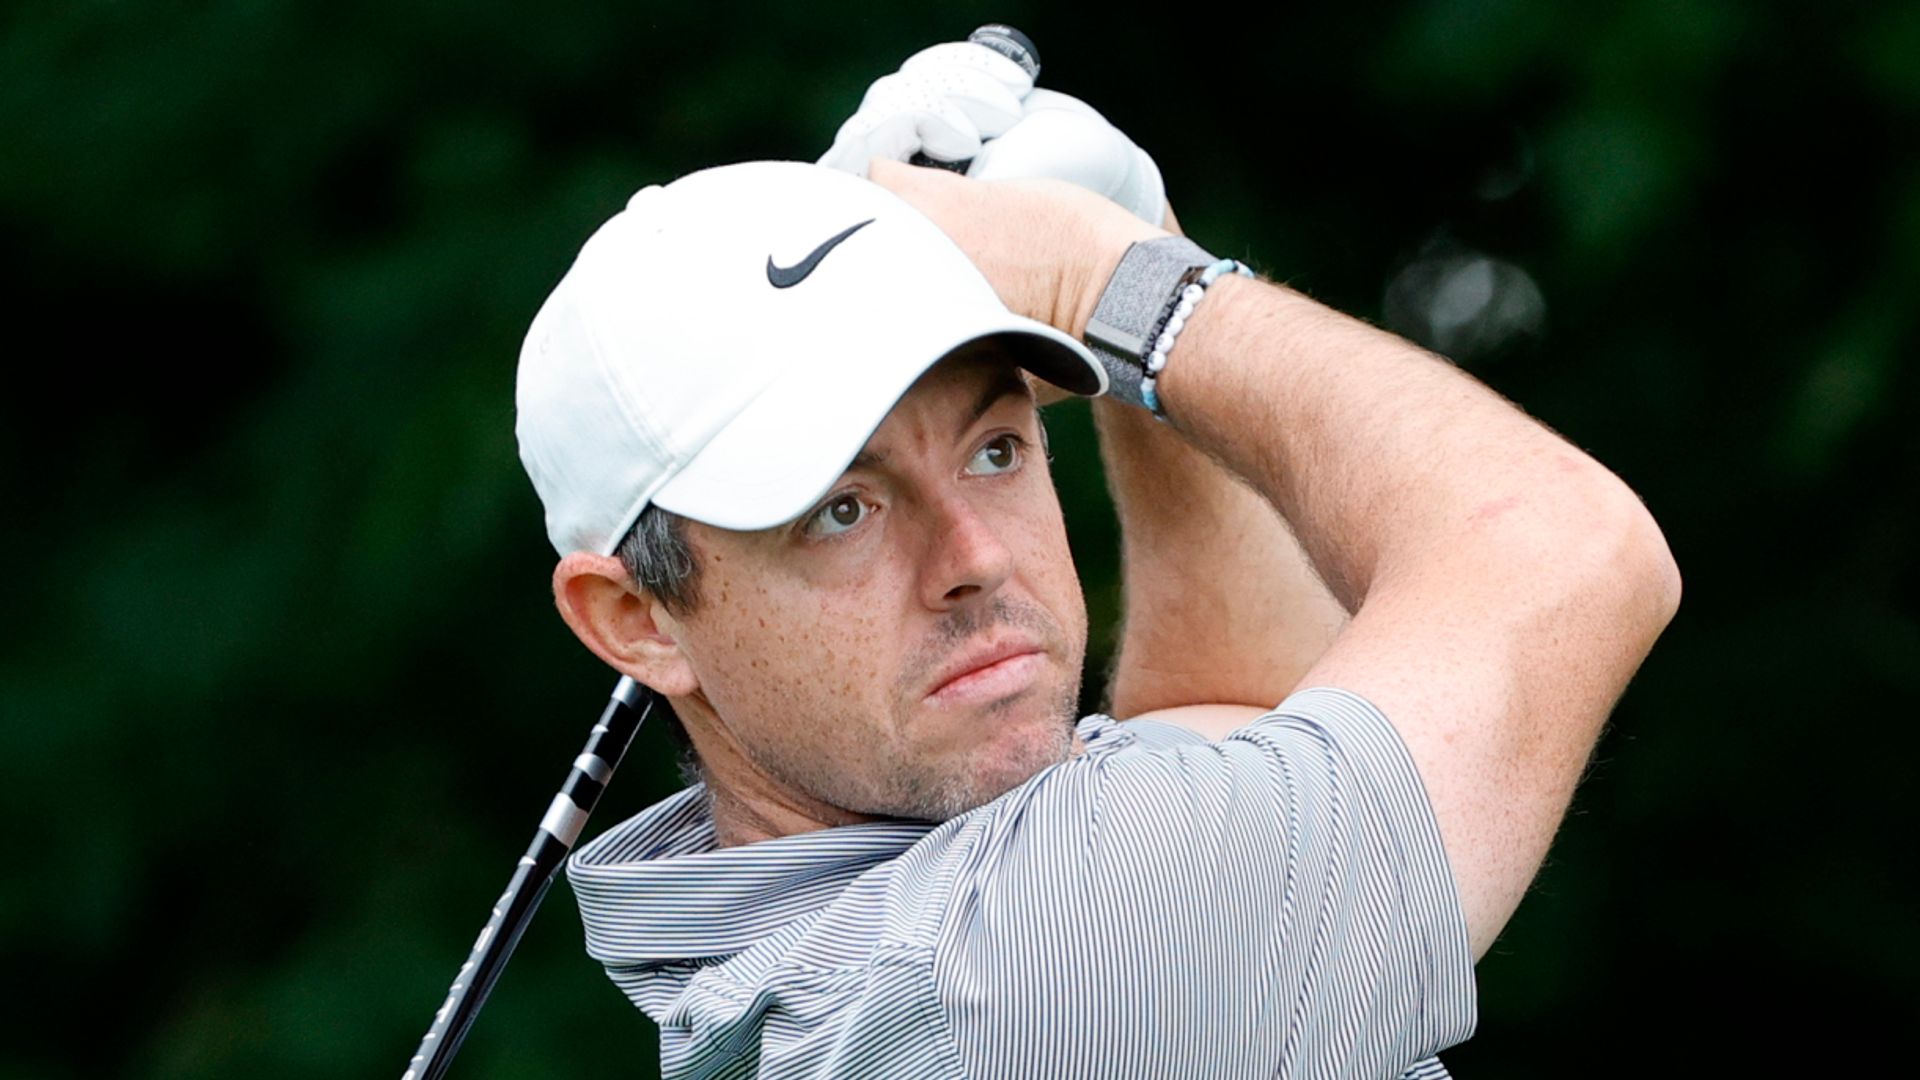 McIlroy ties his lowest opening PGA Tour round at Travelers Championship